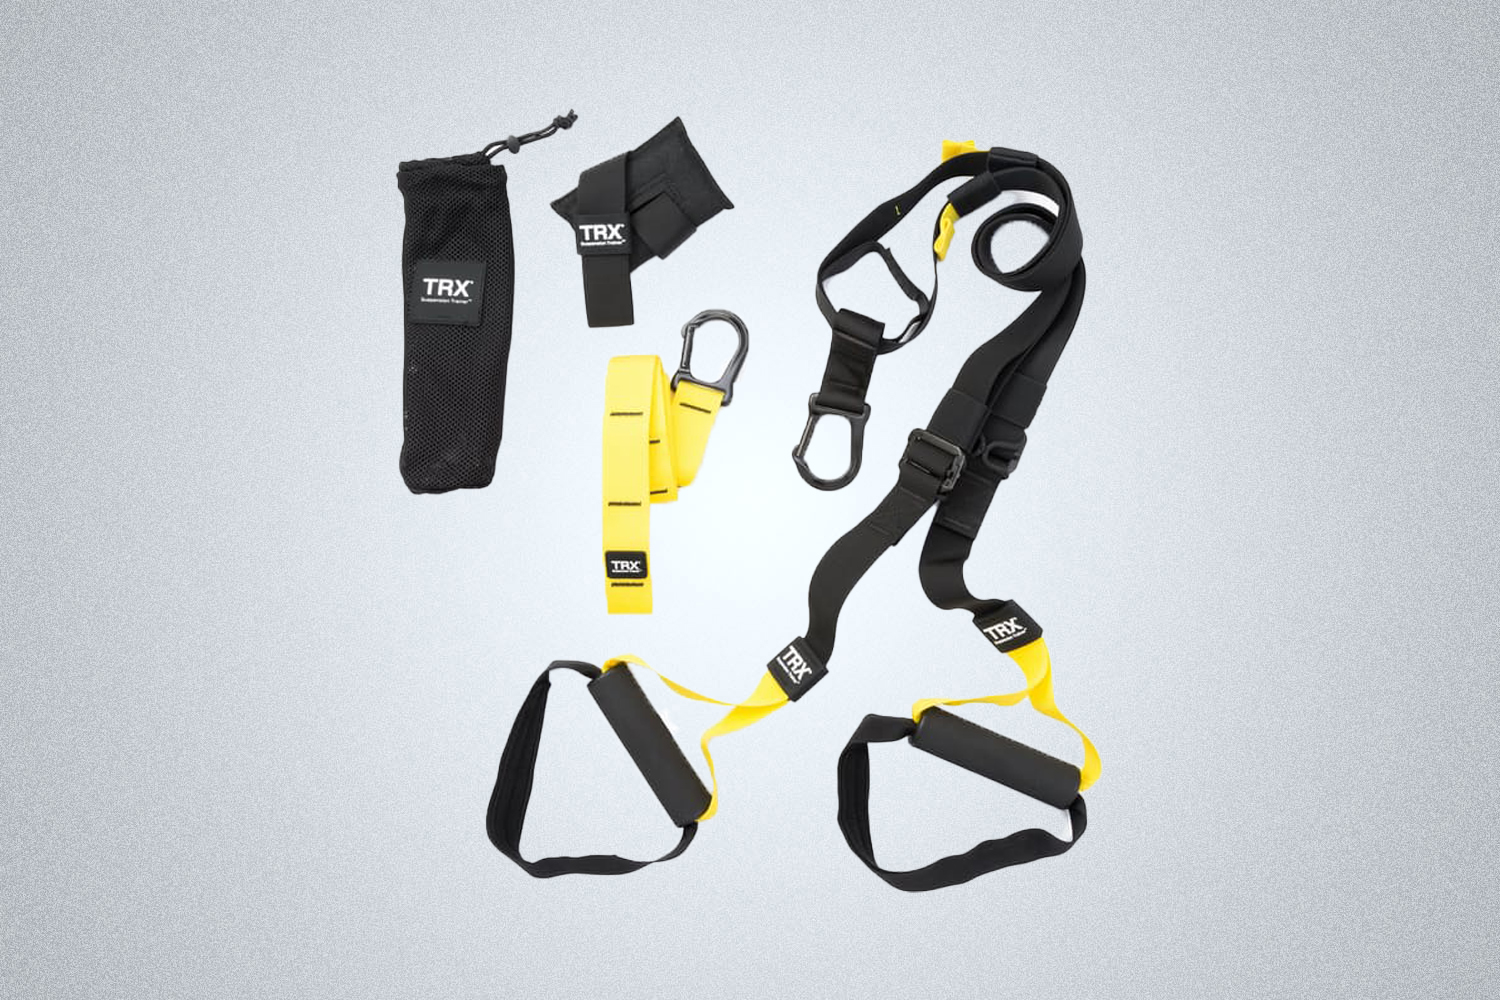 The TRX Original Strong System is portable for on-the-go workouts away from home